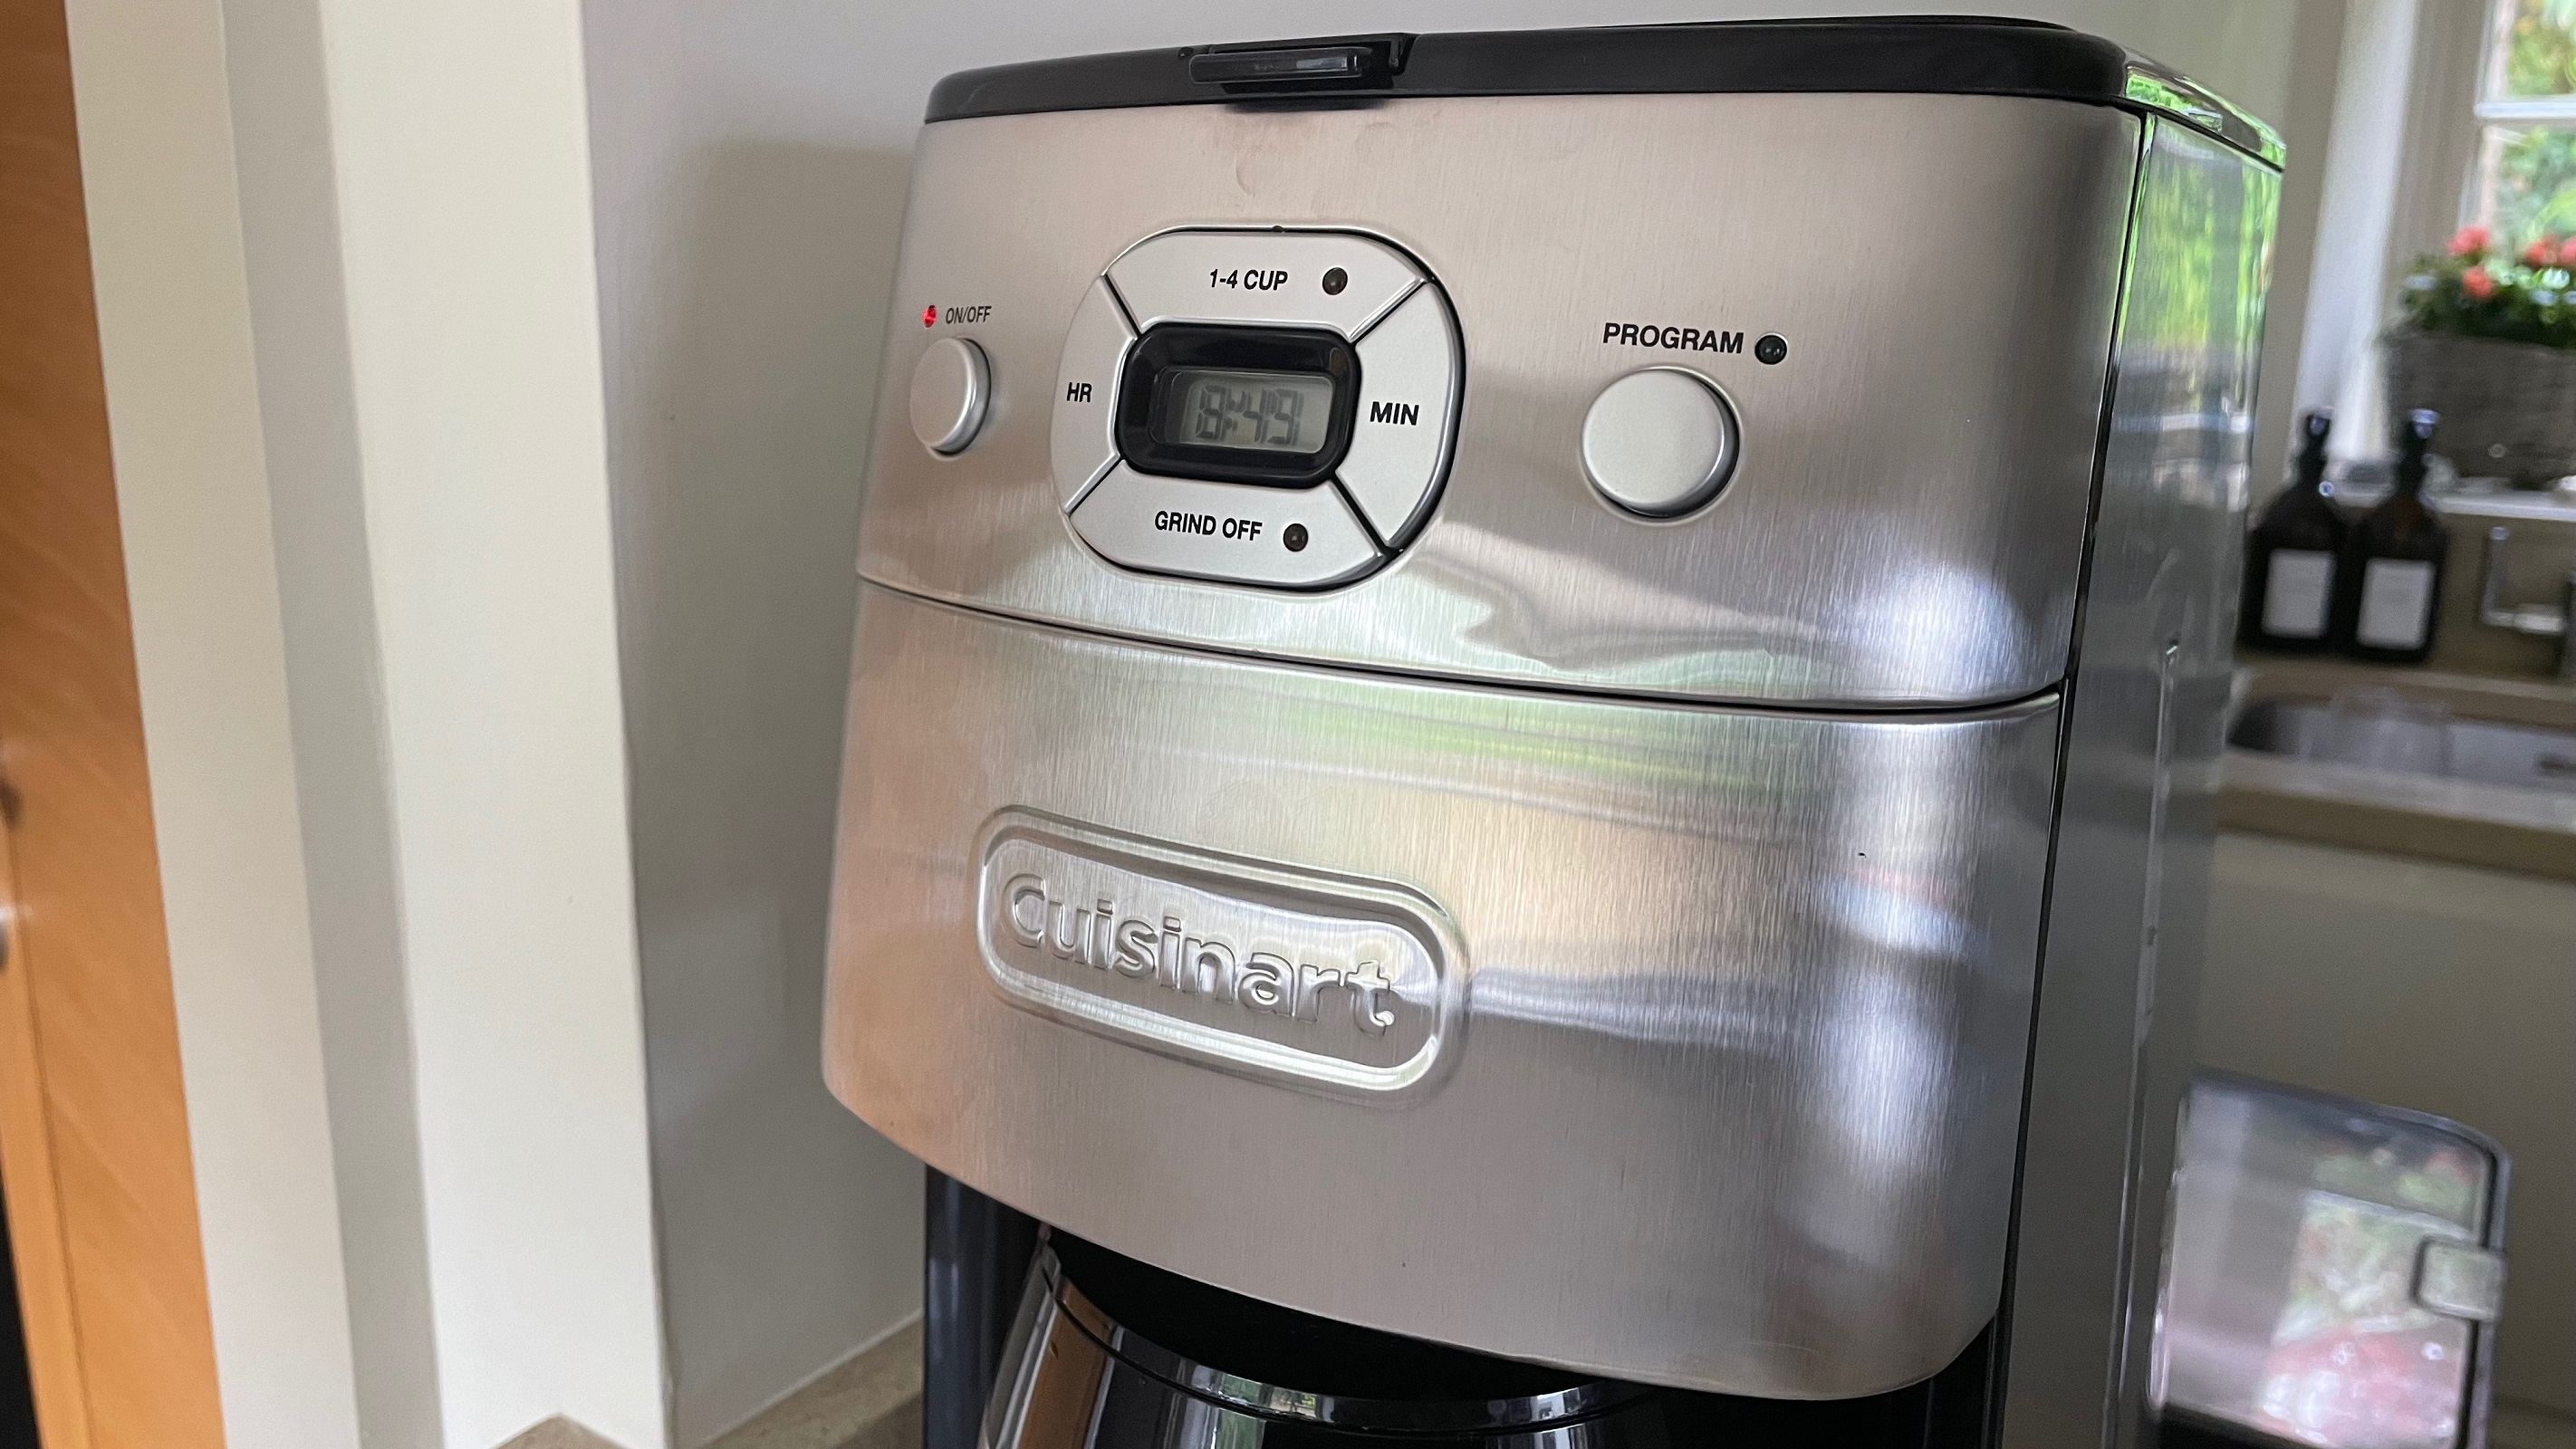 The Cuisinart Grind & Brew Control Panel is uncomplicated